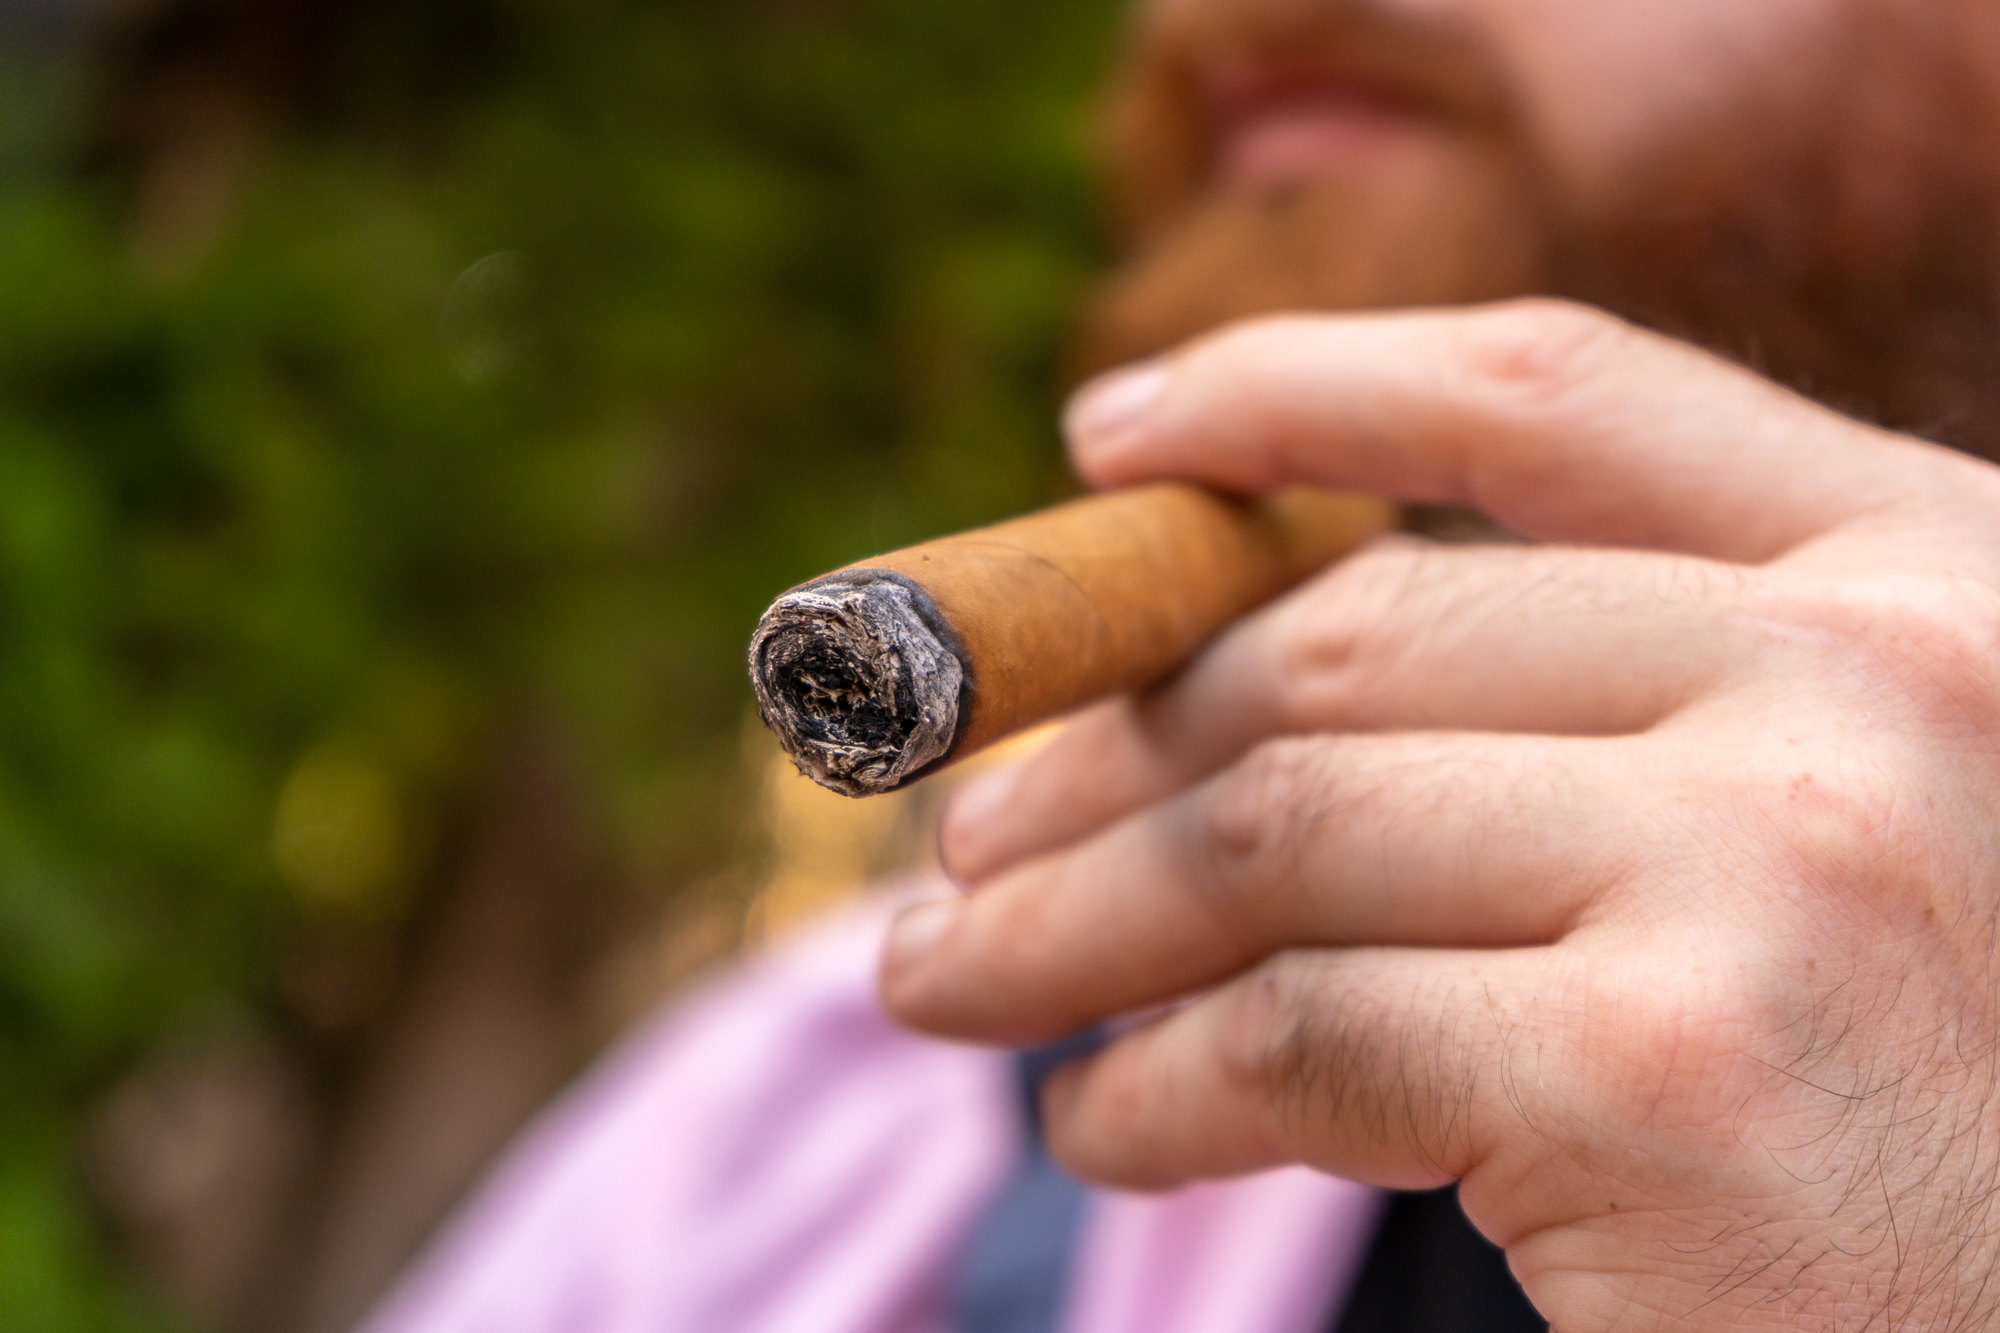 5 ThingsYou Should Never Ask an Experienced Cigar Smoker